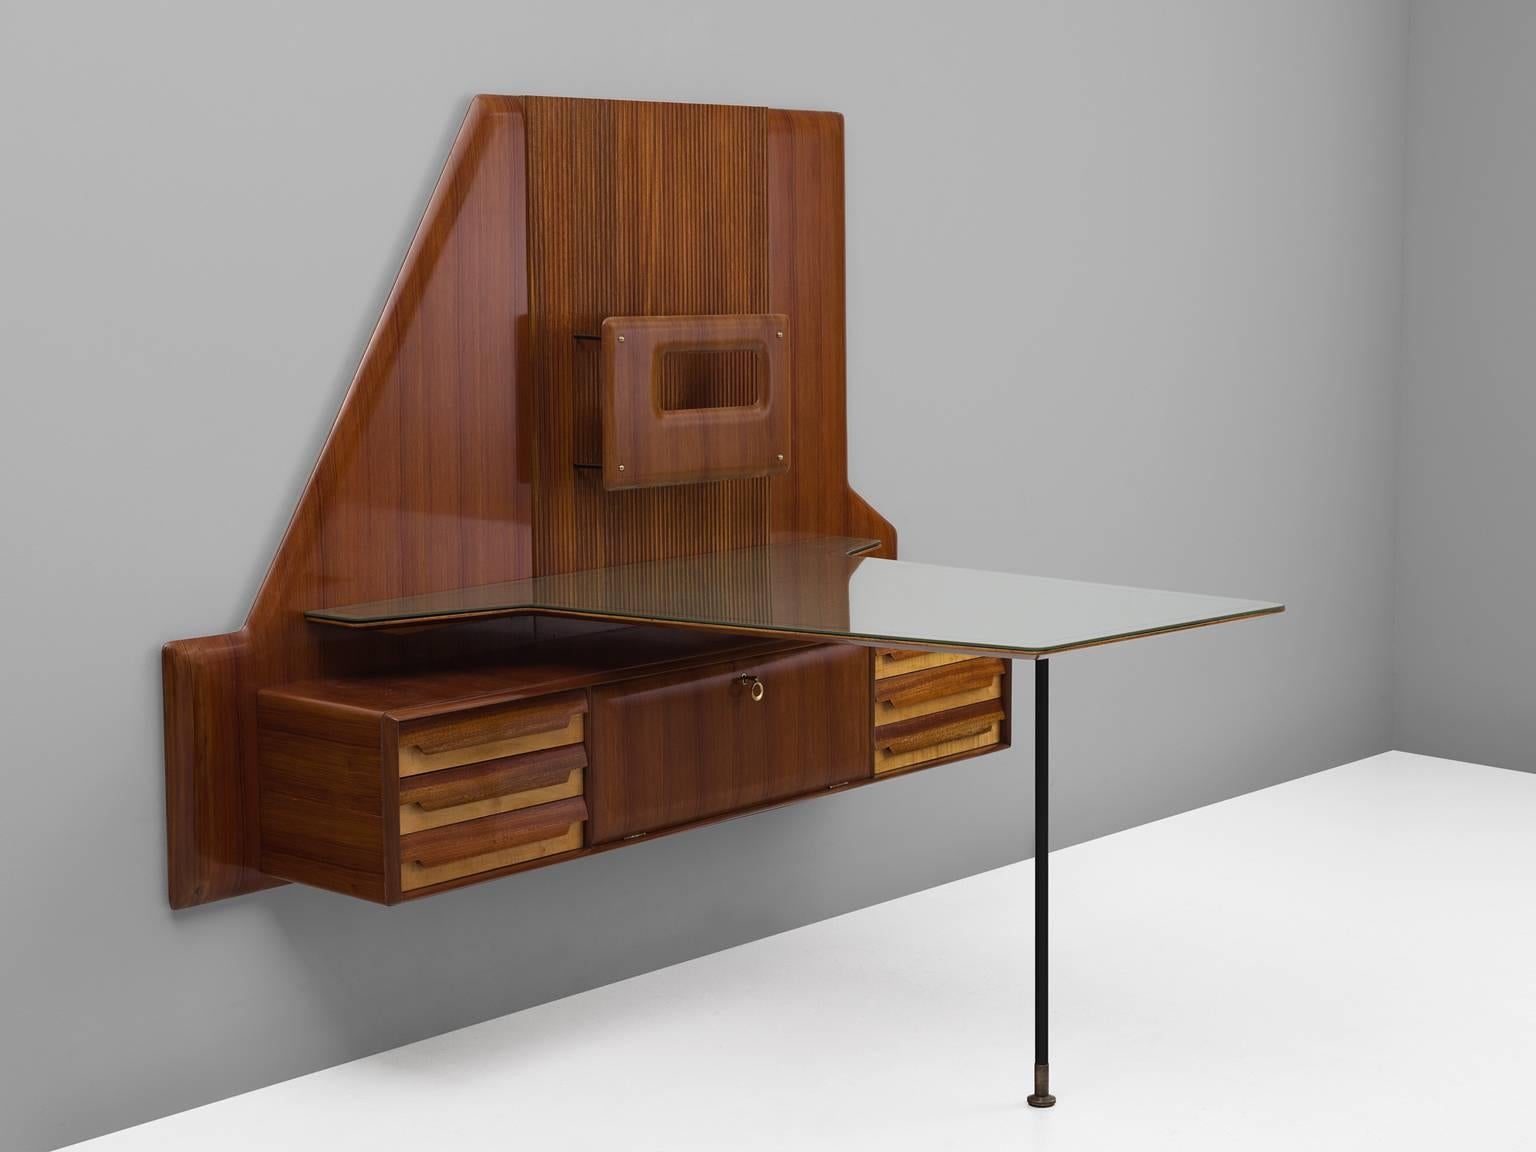 Wall-unit, mahogany and brass, by Gio Ponti, Italy, 1950s. 

Wall console in different sorts of wood, attributed to Italian designer Gio Ponti. Rare wall-mounted desk with glass top. Highly refined bar cabinet in both design and execution. Beautiful